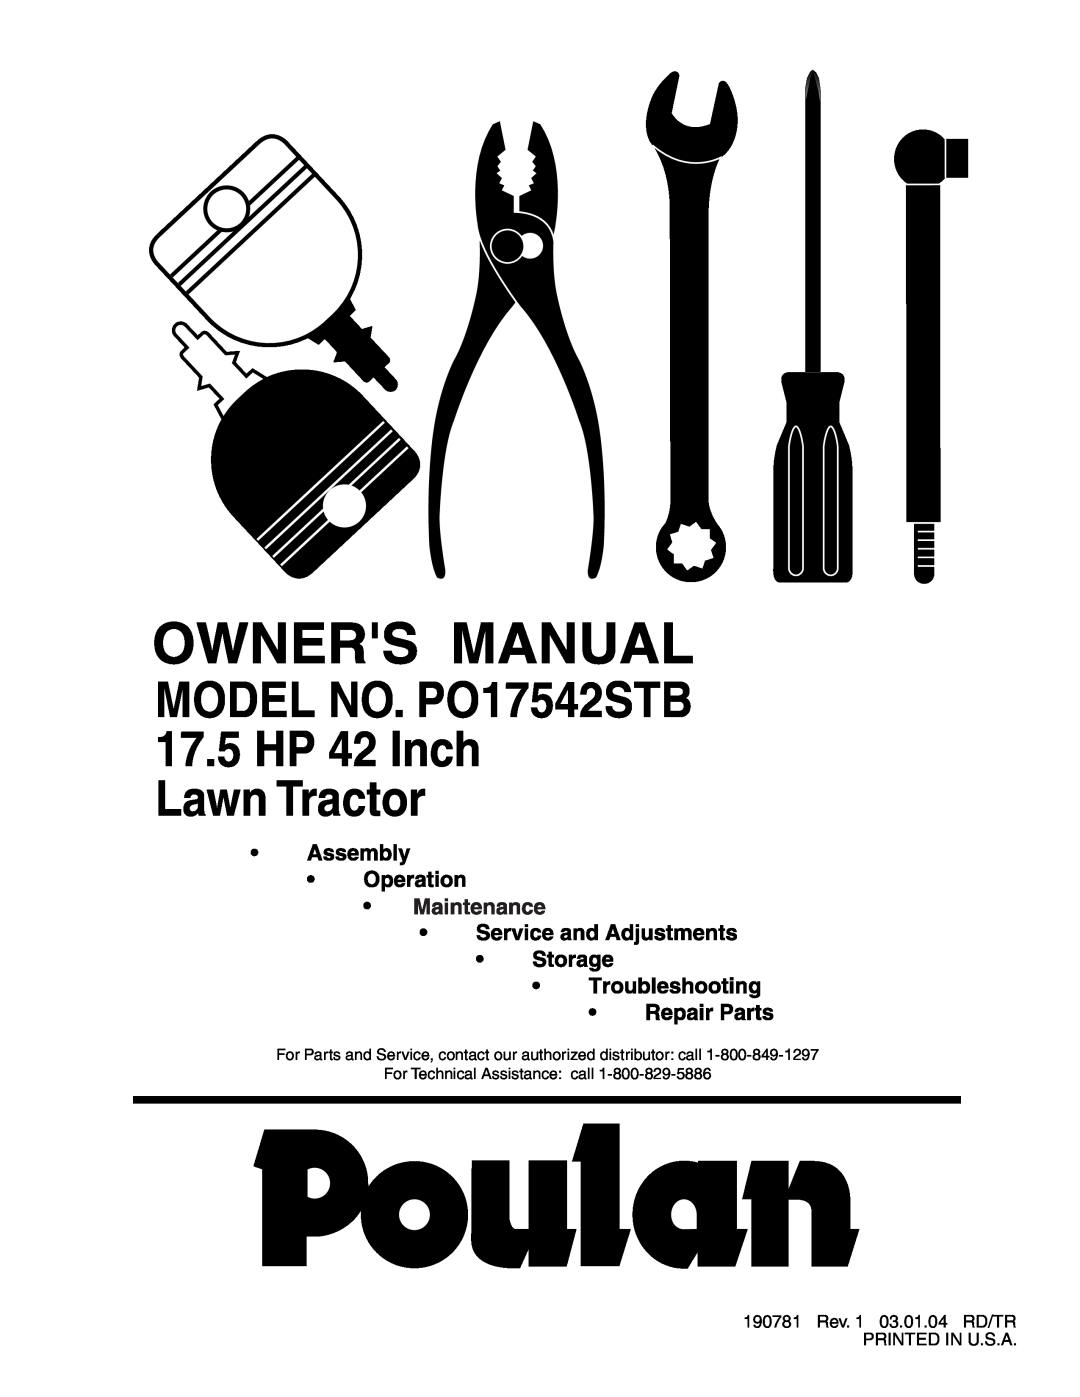 Poulan manual MODEL NO. PO17542STB 17.5 HP 42 Inch Lawn Tractor 